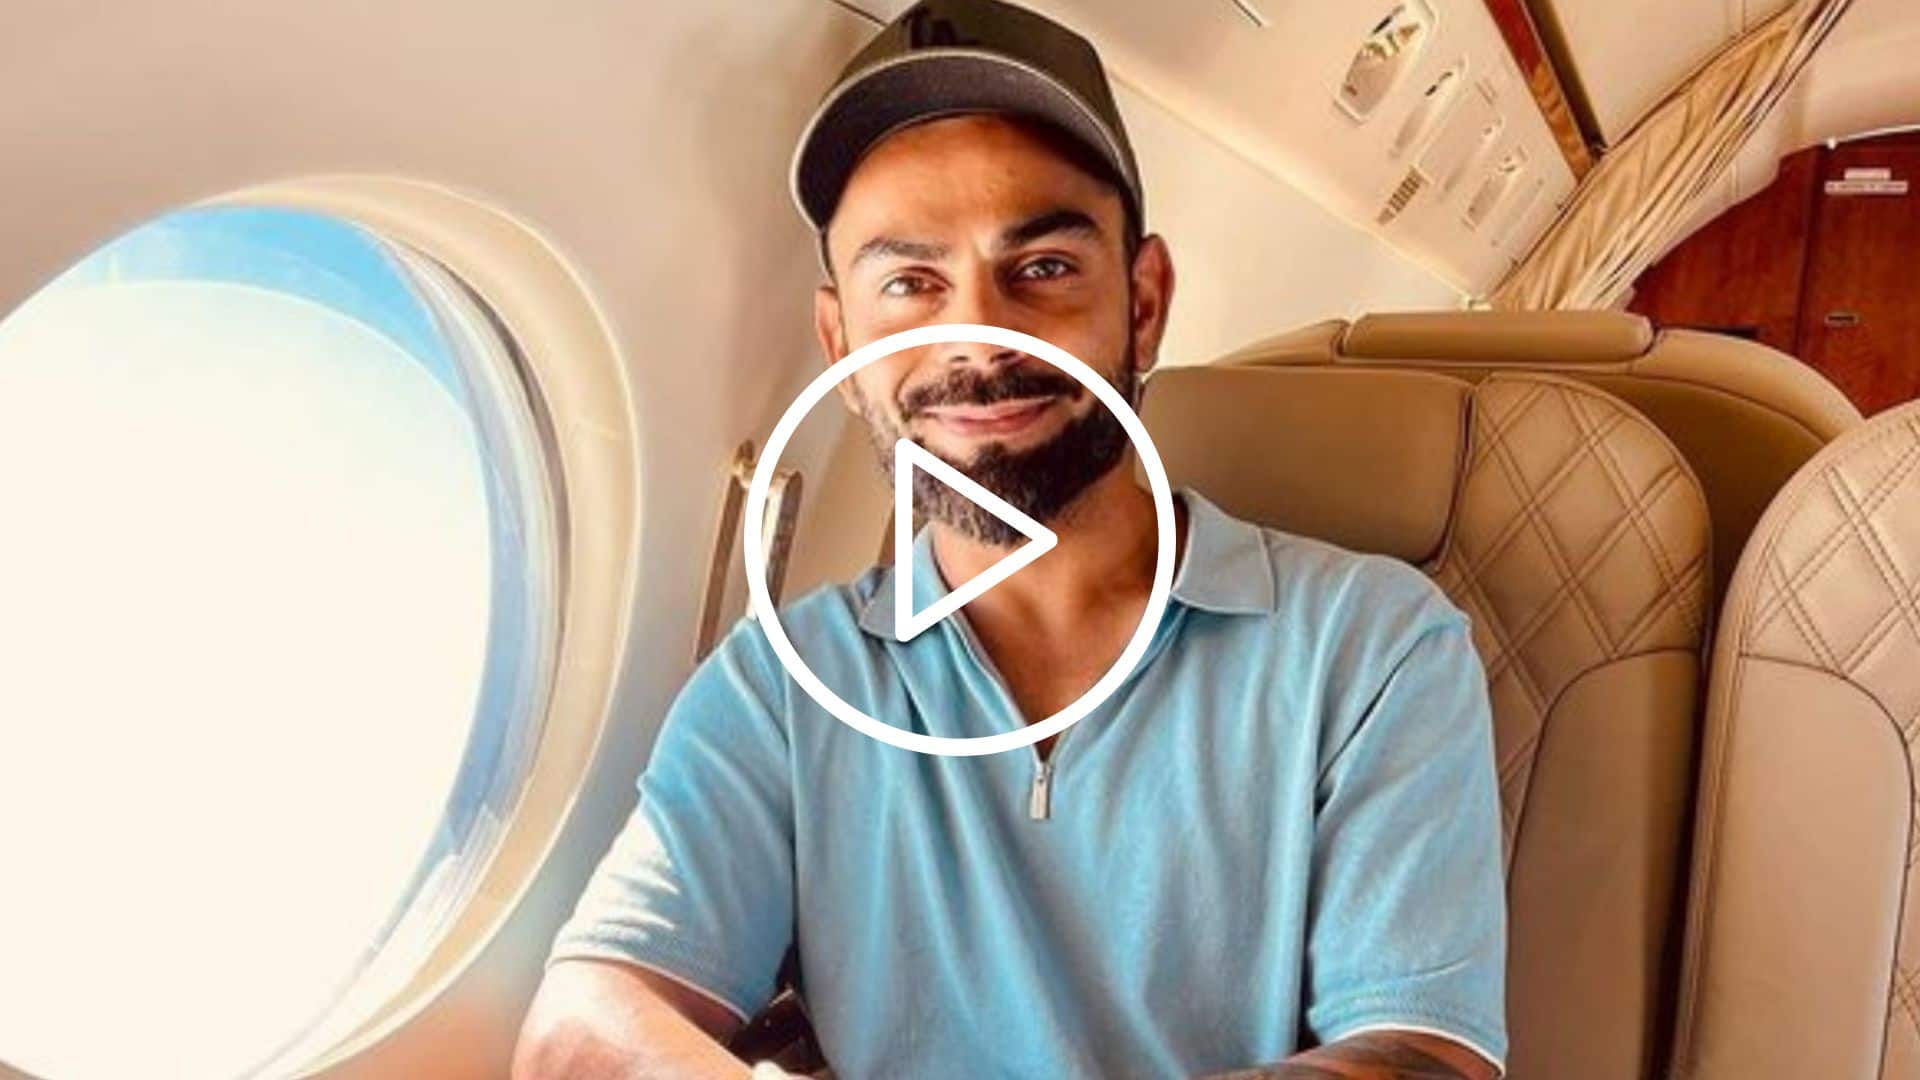 [Watch] Virat Kohli Takes Flight Back To India Via Special Charter Service After West Indies ODIs